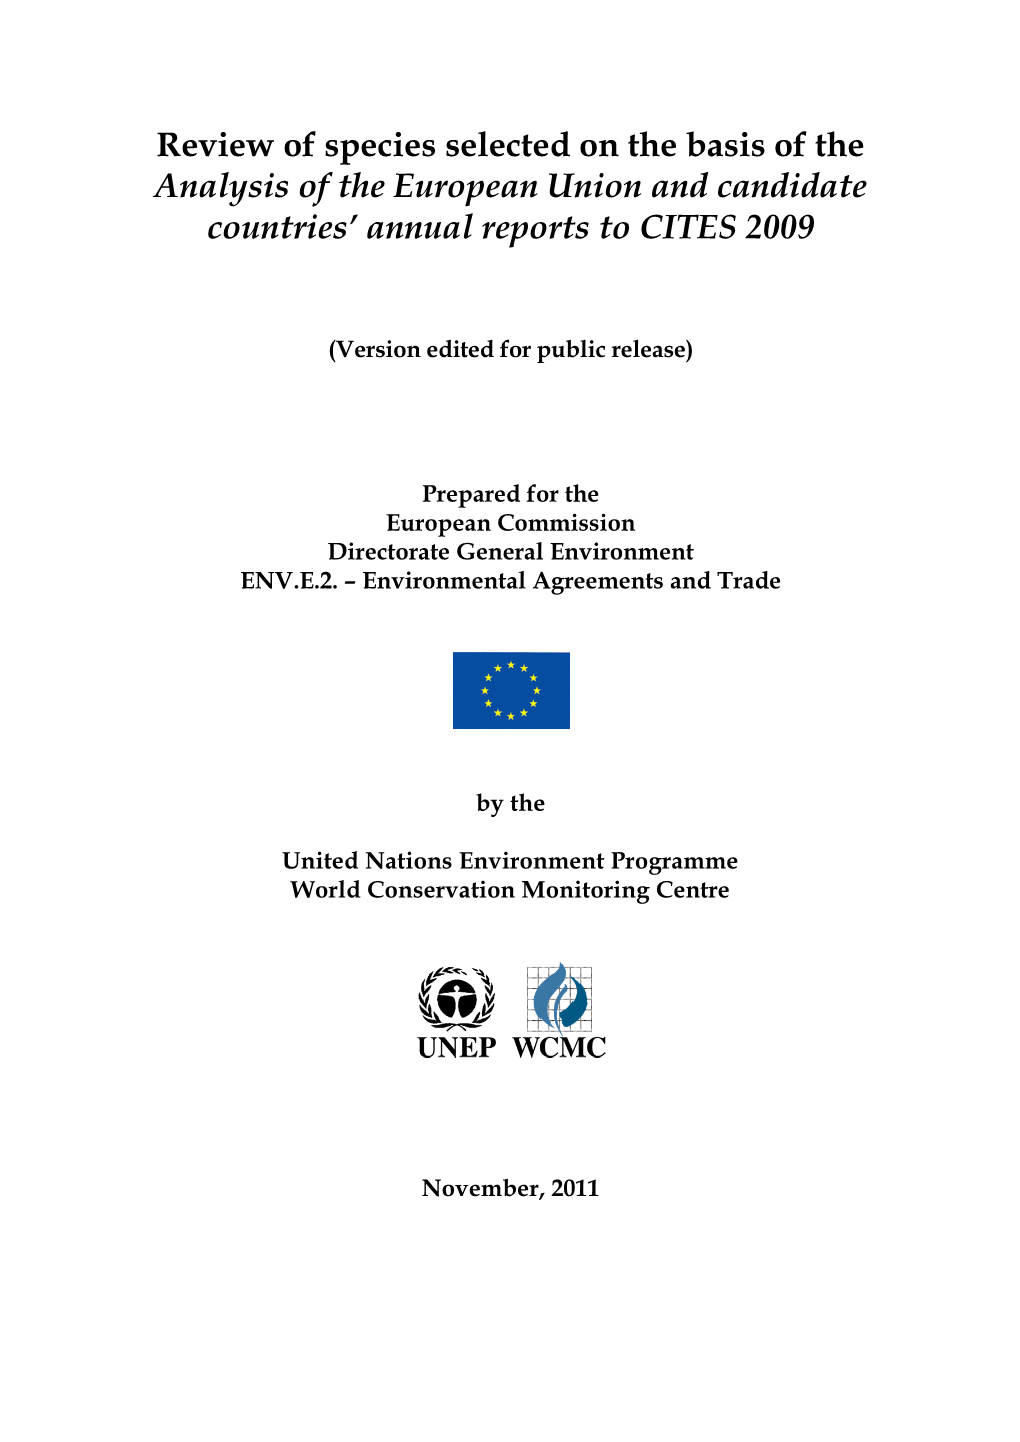 Review of Species Selected on the Basis of the Analysis of the European Union and Candidate Countries’ Annual Reports to CITES 2009